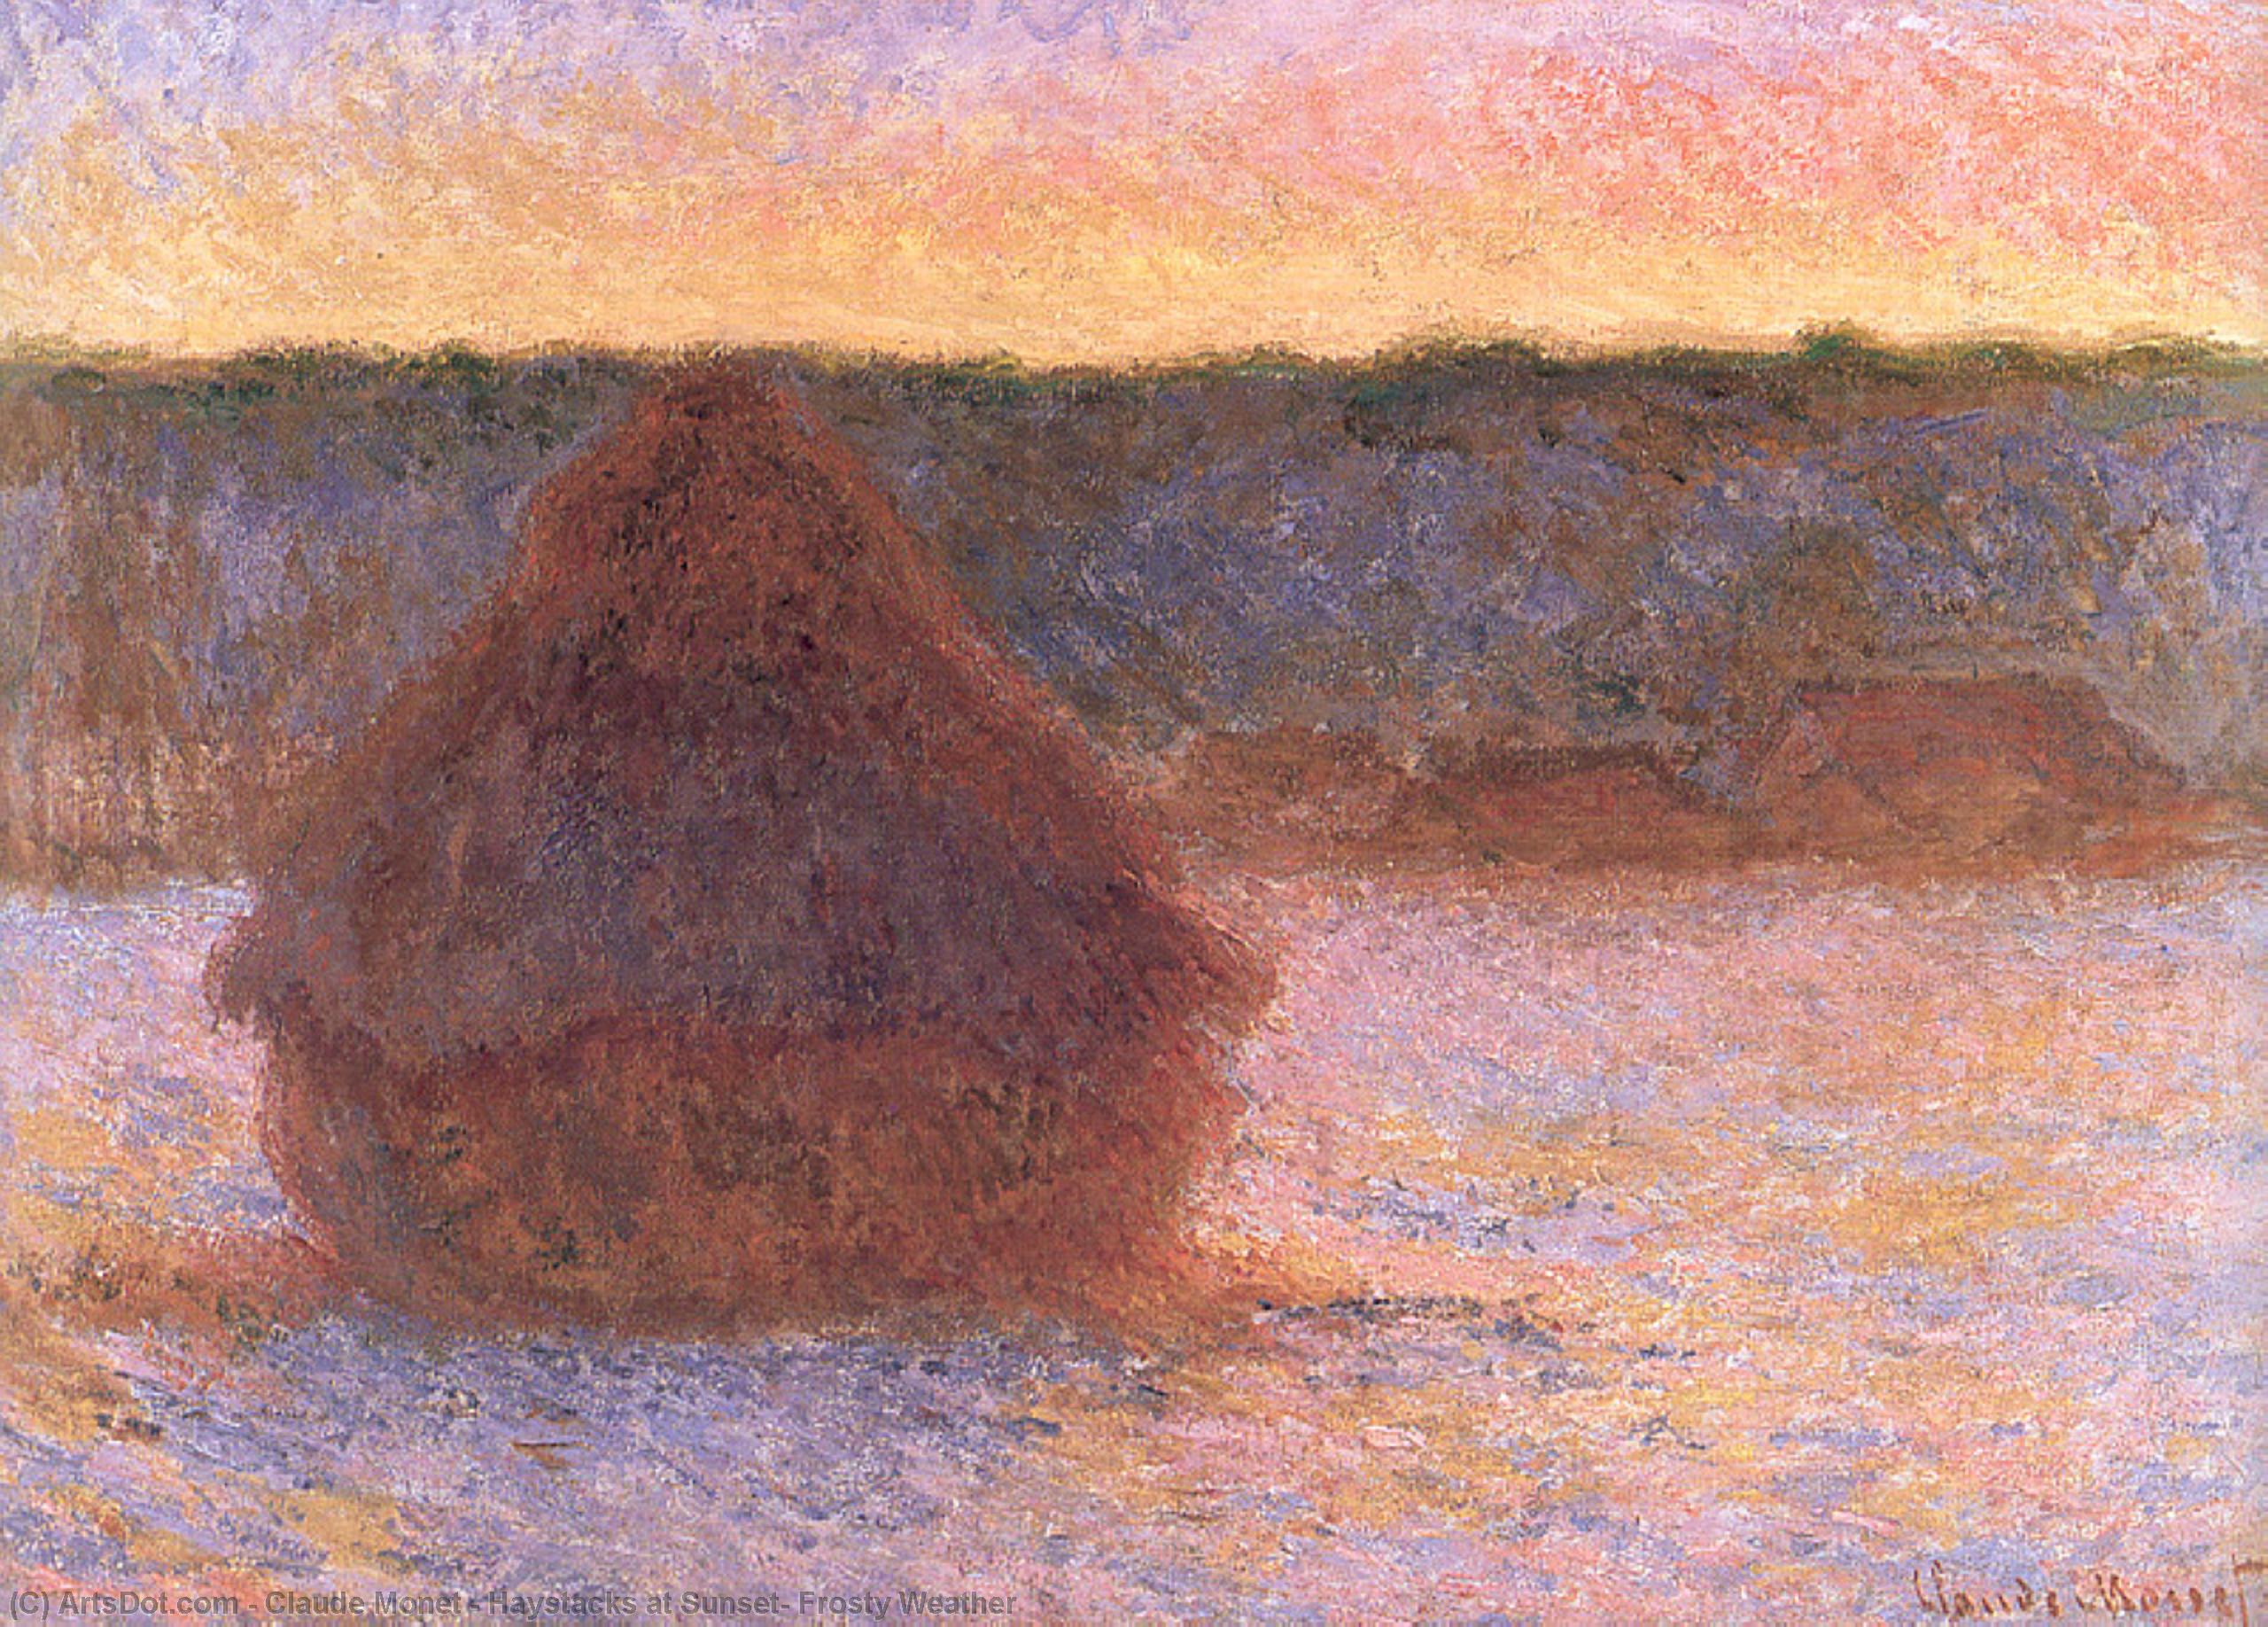 WikiOO.org - 백과 사전 - 회화, 삽화 Claude Monet - Haystacks at Sunset, Frosty Weather